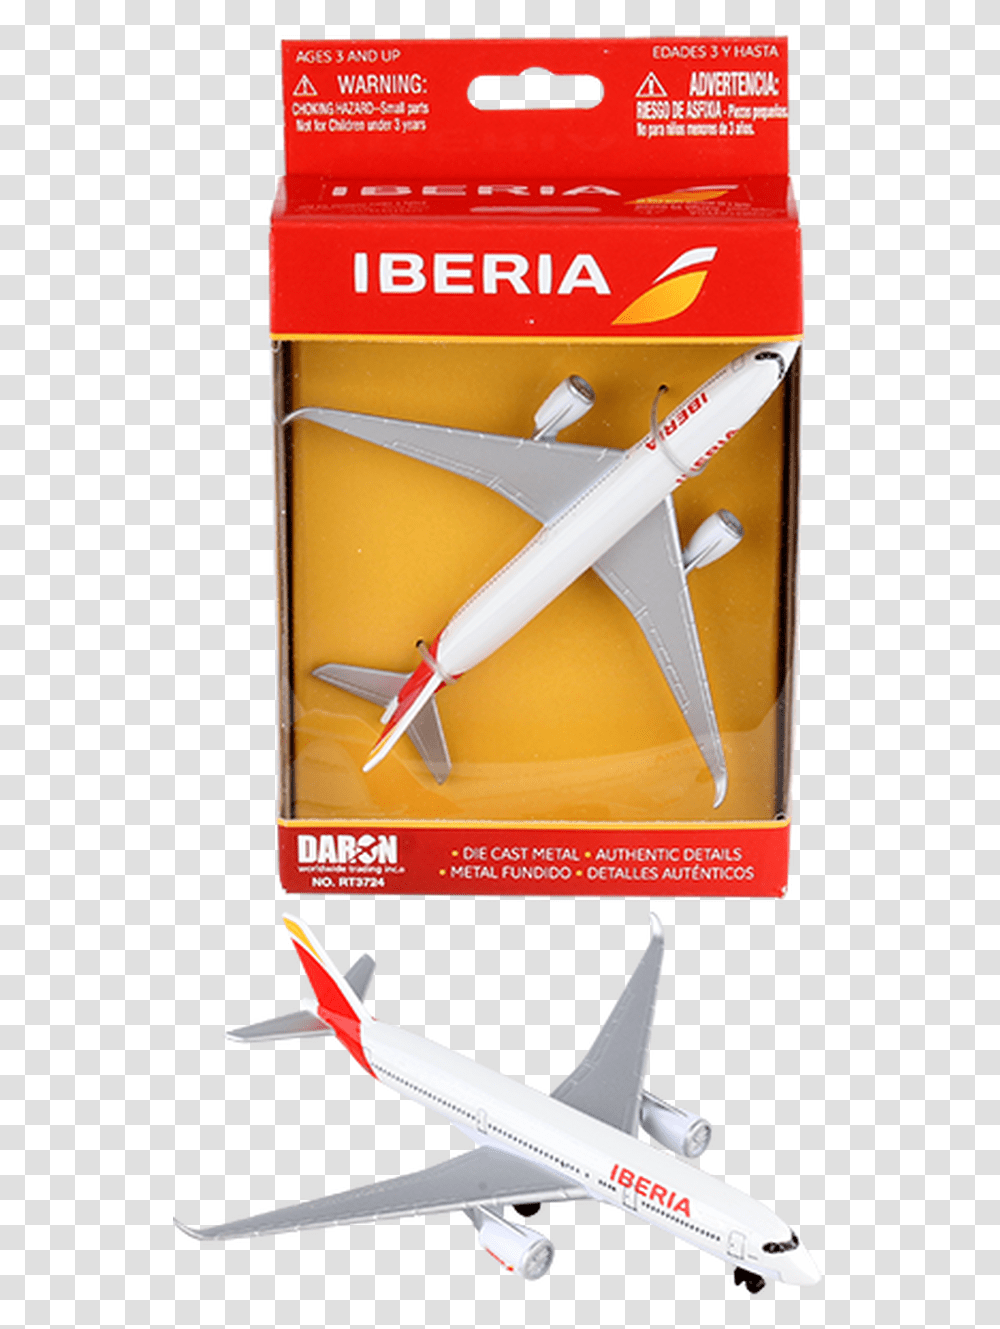 Iberia Toy Diecast Aircraft Airbus A350 Daron Toys Airplanes, Transportation, Vehicle, Electronics, Airliner Transparent Png